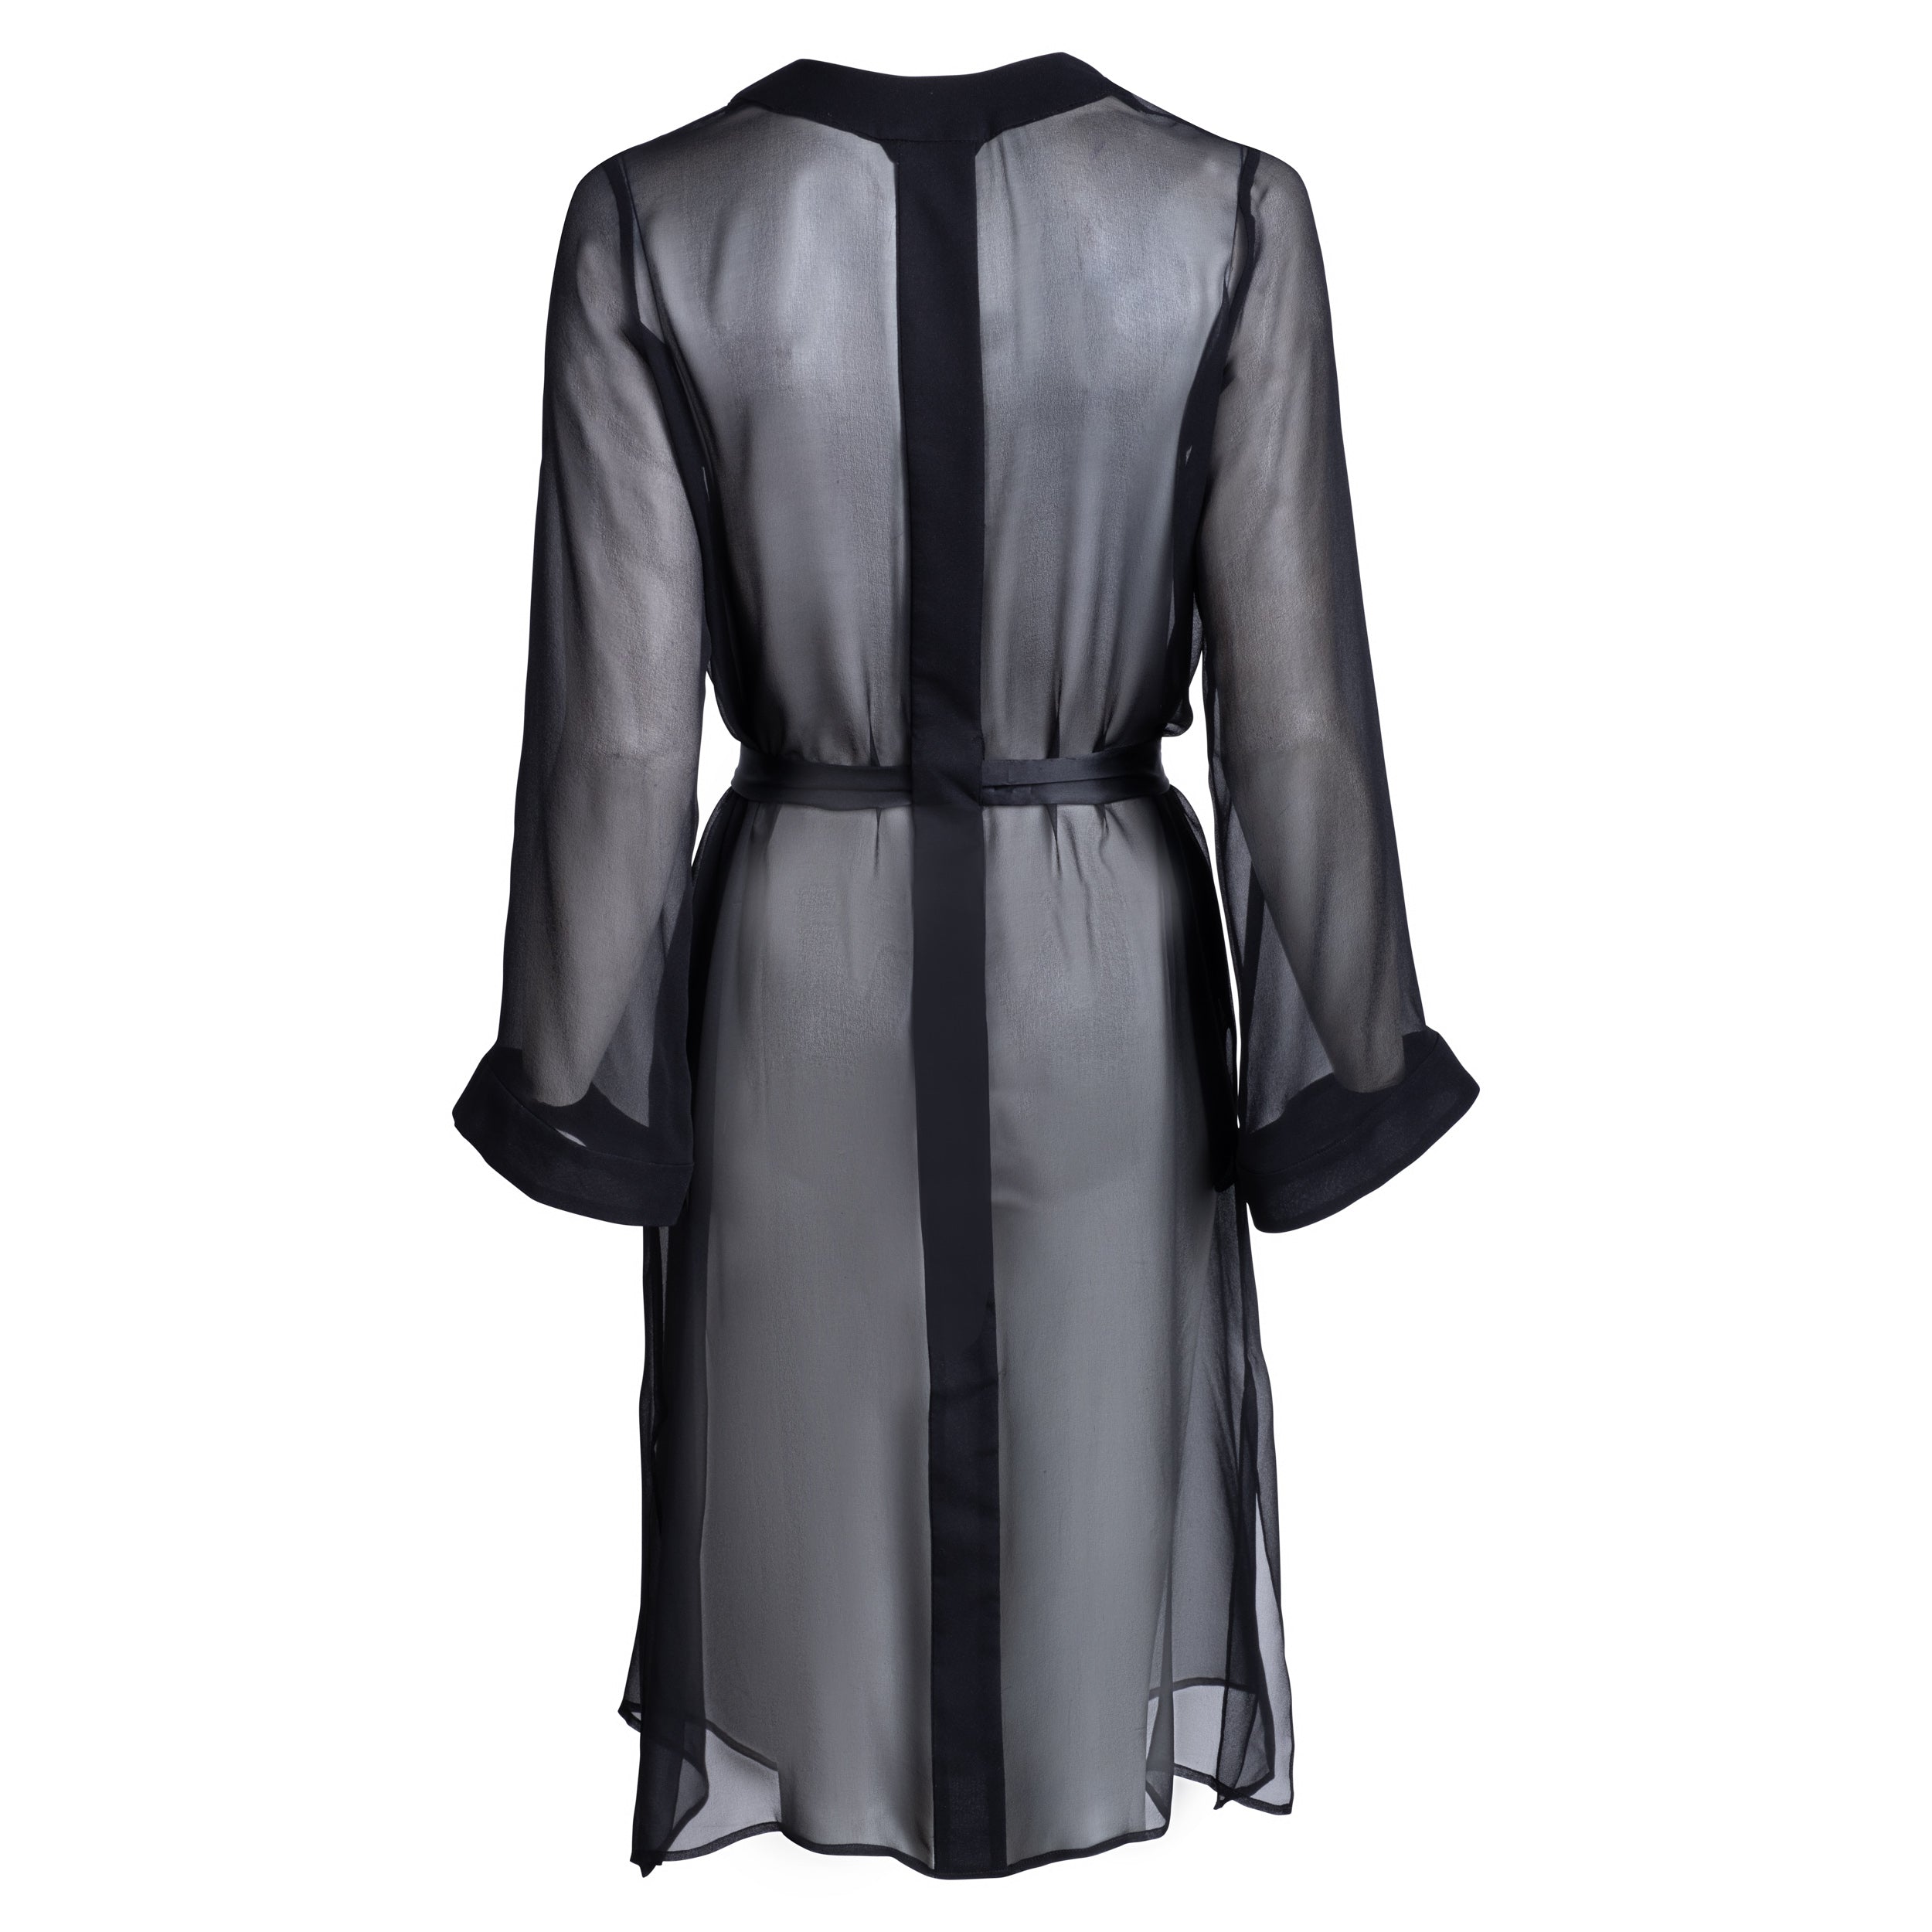 made from silk chiffon, this hidden button front nightdress can be worn open or fully buttoned, in and outside of the boudoir as a robe or a shirtdress (shirt dress)  belt loop is subtly and discretely hidden behind the back placket  complete with resting pockets  wear with a je mérite coordinating bottom or chemise  soft collar v-neck neckline subtle slits at sides sensual fit midi length  100% silk chiffon  designed in new york city, new york made in new york city, new york